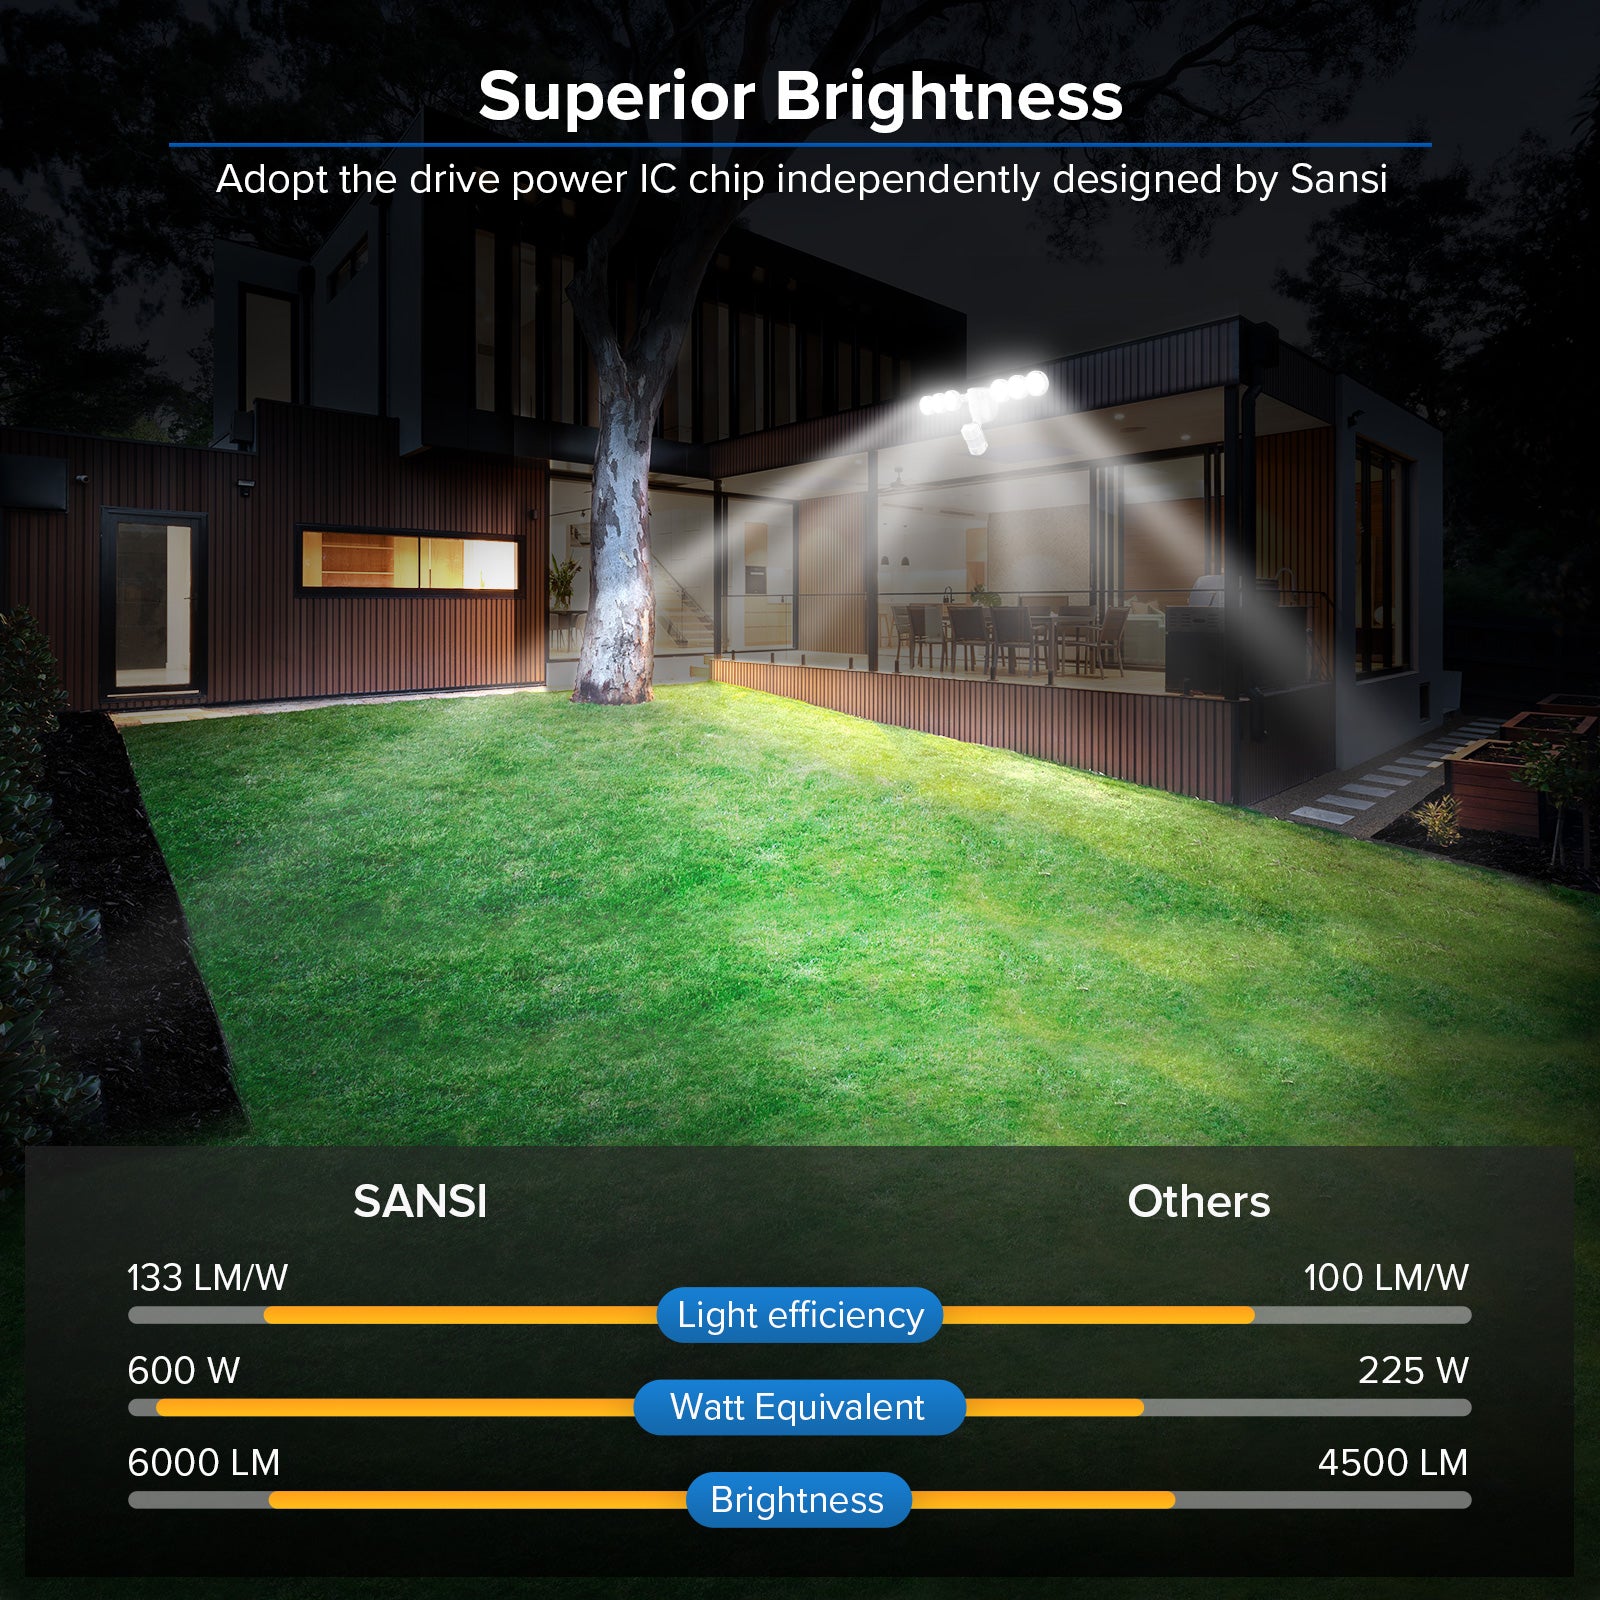 45W LED Security Light (Dusk to Dawn & Motion Sensor) with the drive power IC chip independently designed by SANSI, superior brightness